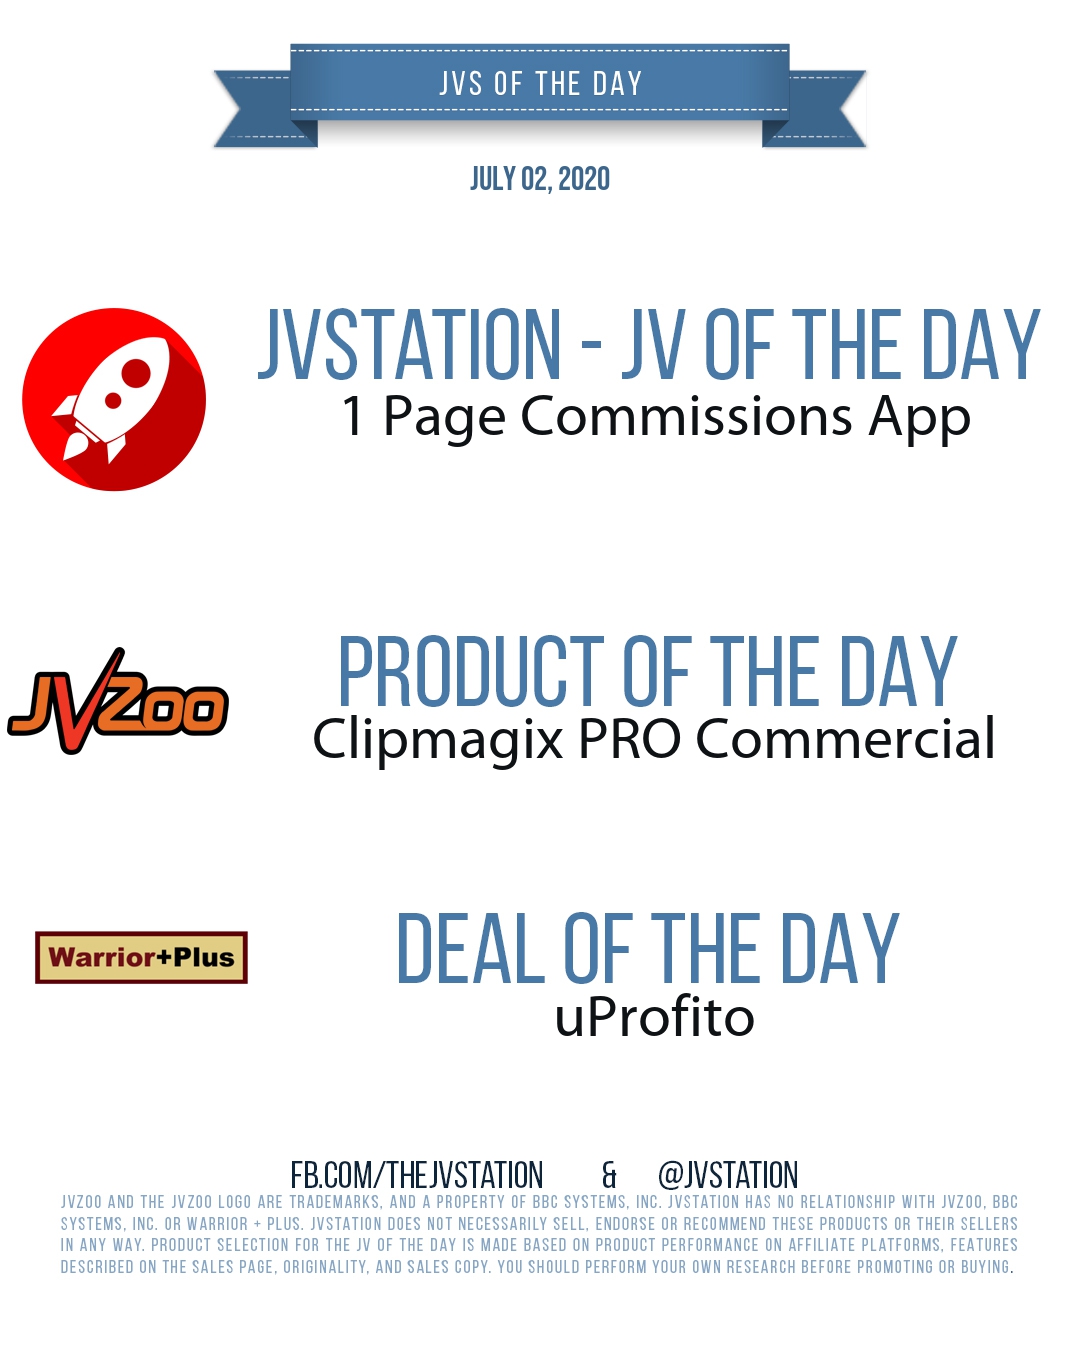 JVs of the day - July 02, 2020